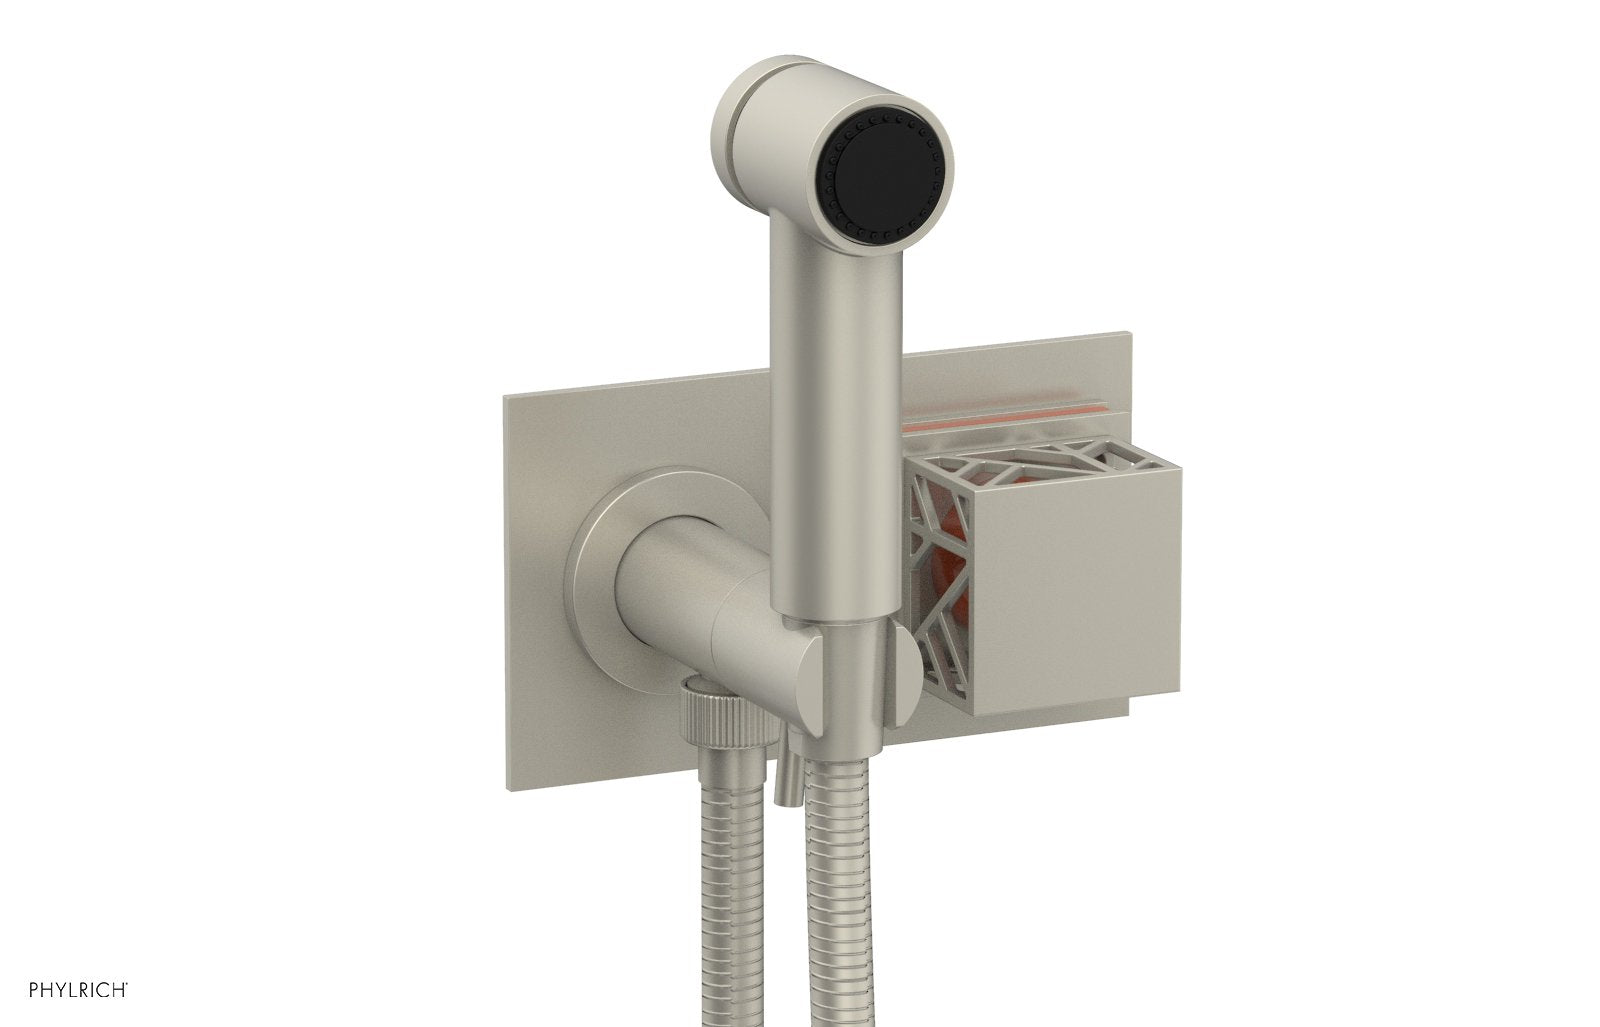 Phylrich JOLIE Wall Mounted Bidet, Square Handle with "Orange" Accents